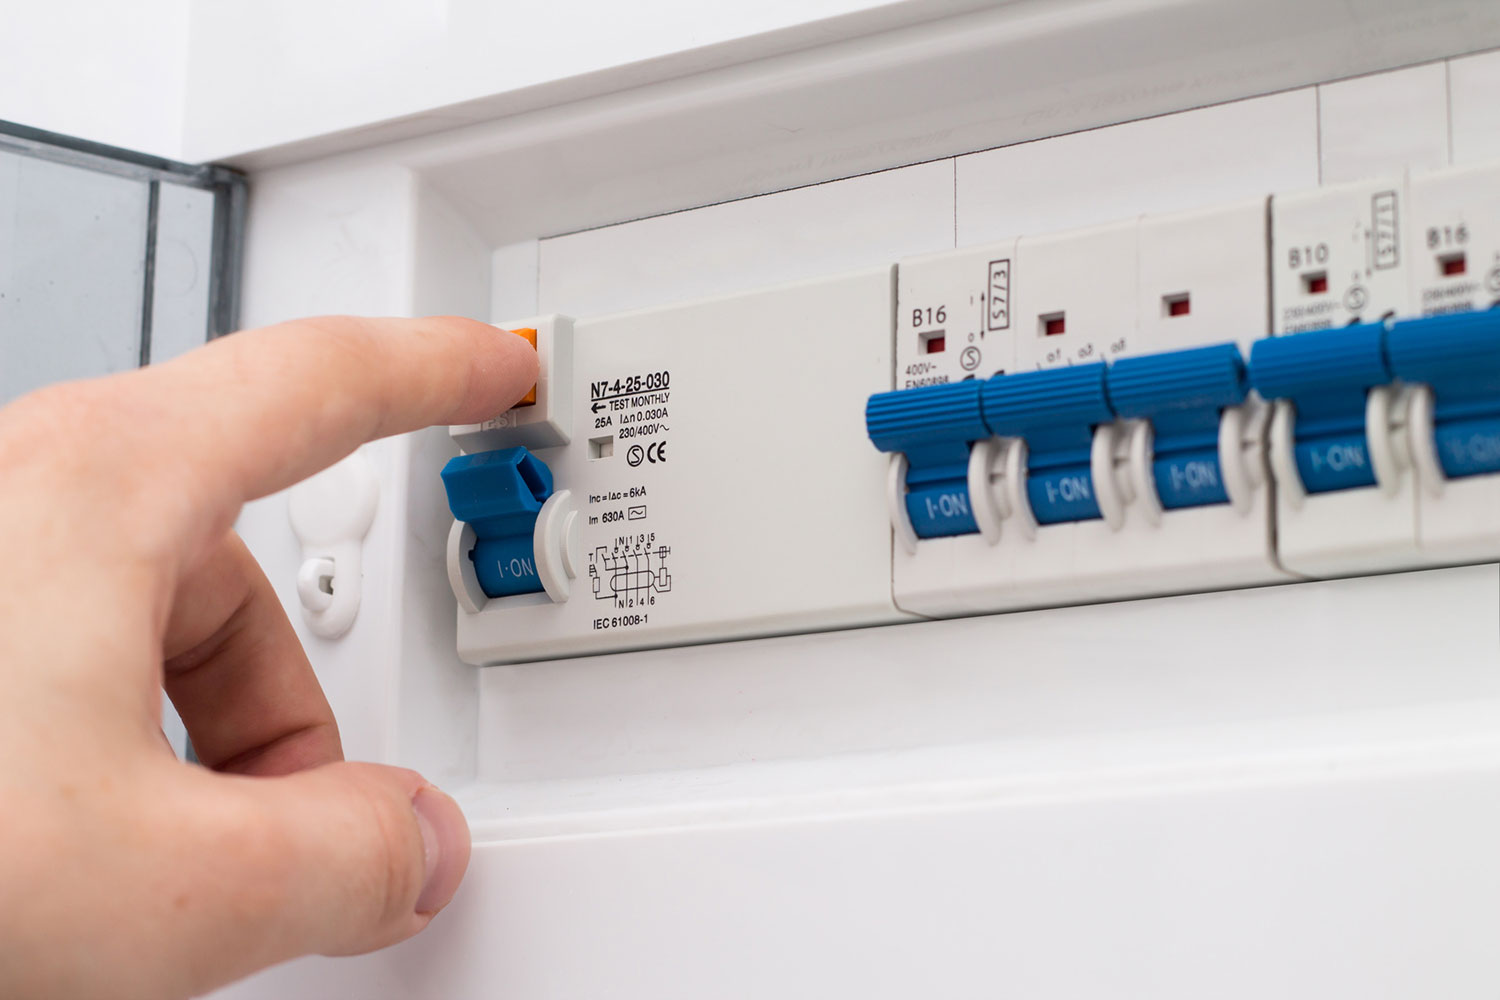 5 Steps To Take if Your Circuit Breaker Trips